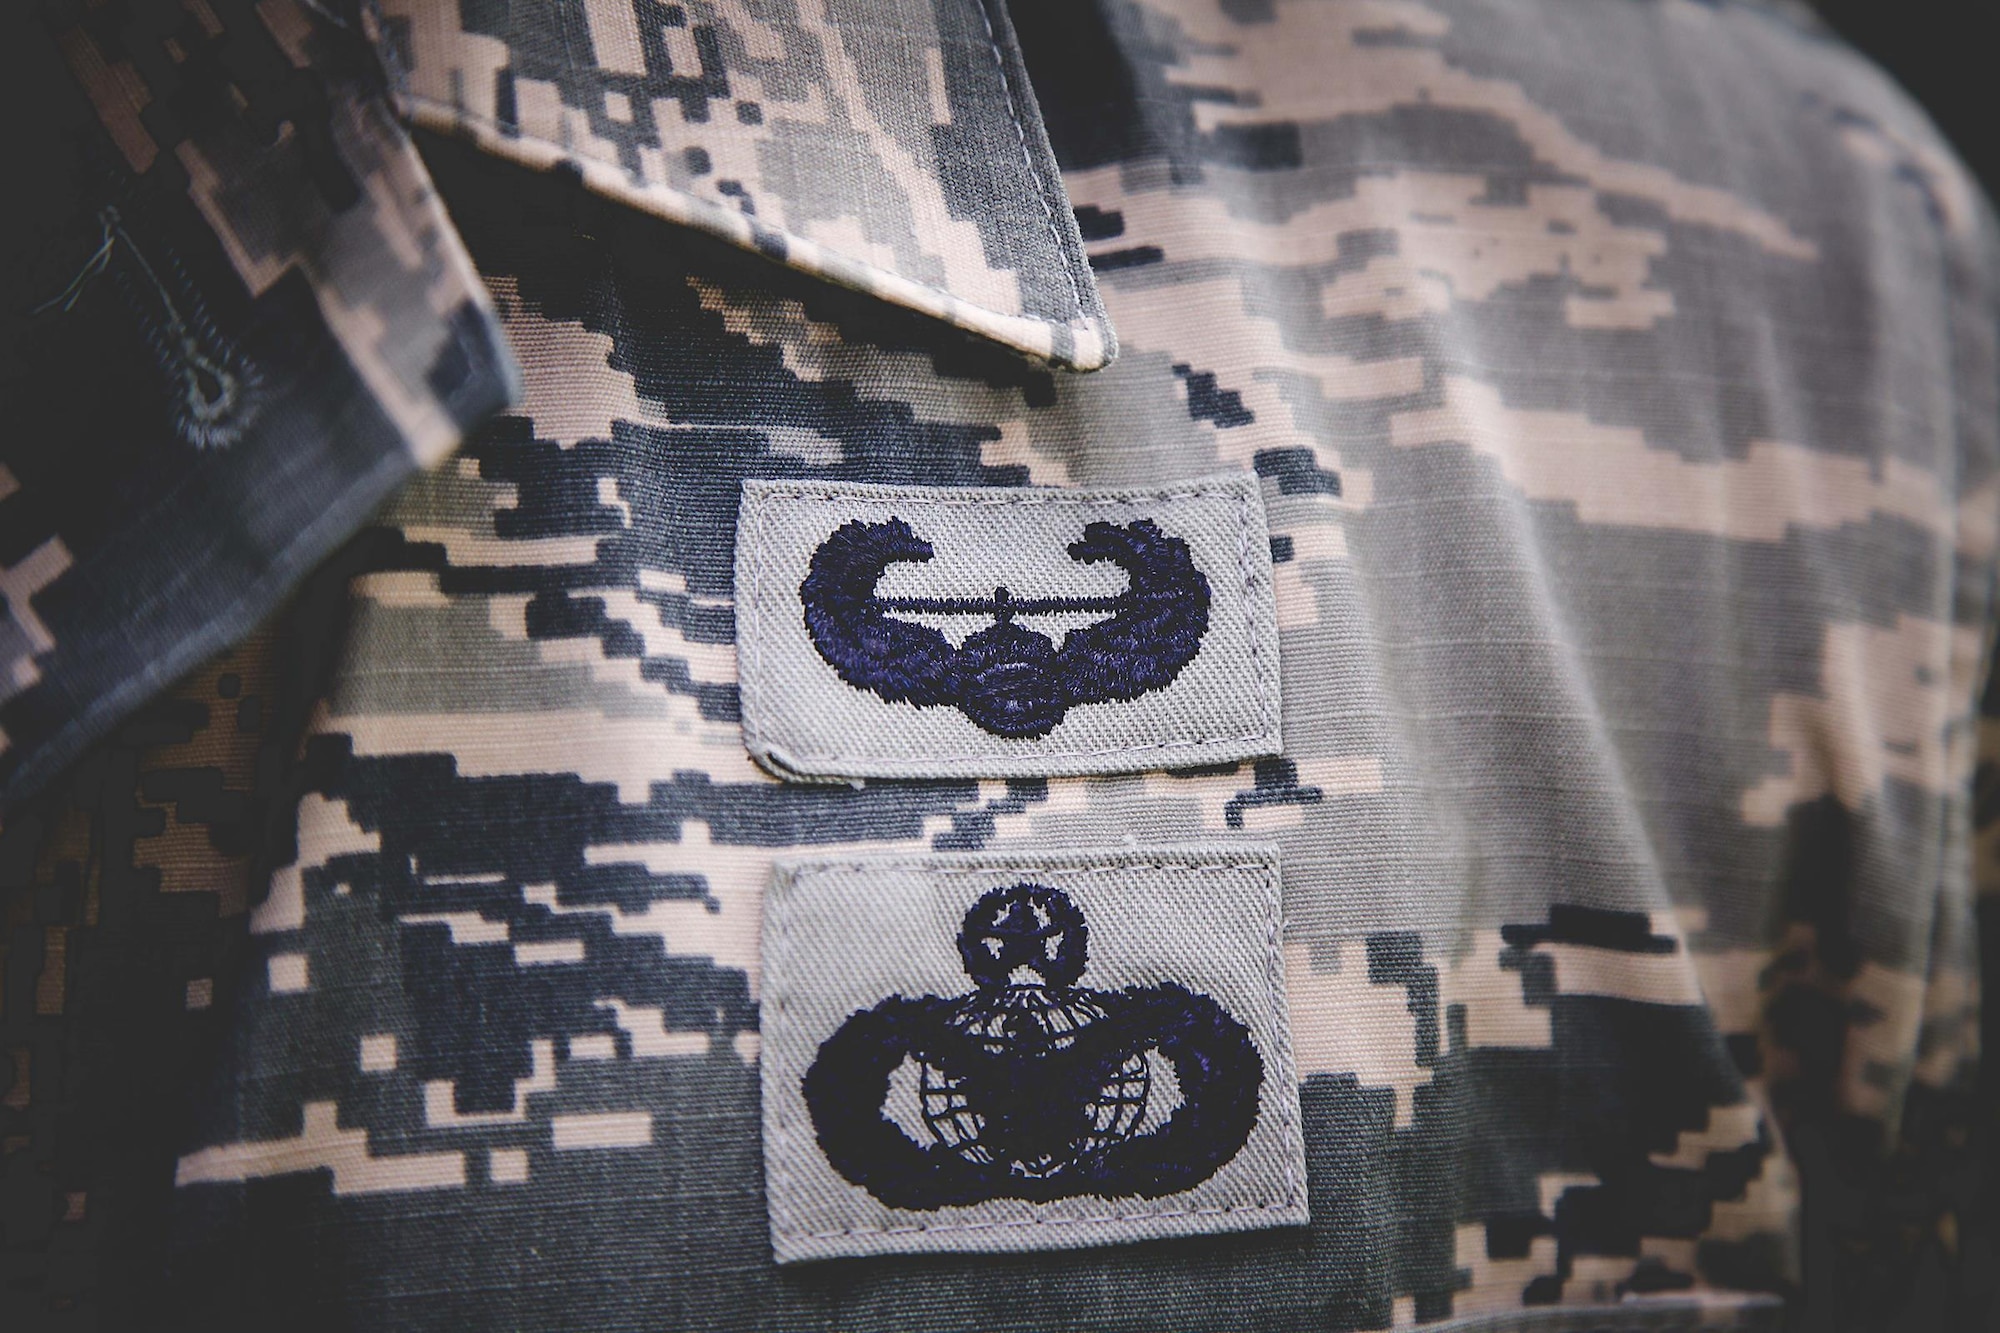 Chief Master Sgt. Rob Grimsley, 315th Security Forces Squadron, wears the Army Air Assault Badge on his Air Force Airman Battle Uniform (here). He is also authorized to wear the badge on his blues. (U.S. Air Force photo by 2nd Lt. Rashard Coaxum)